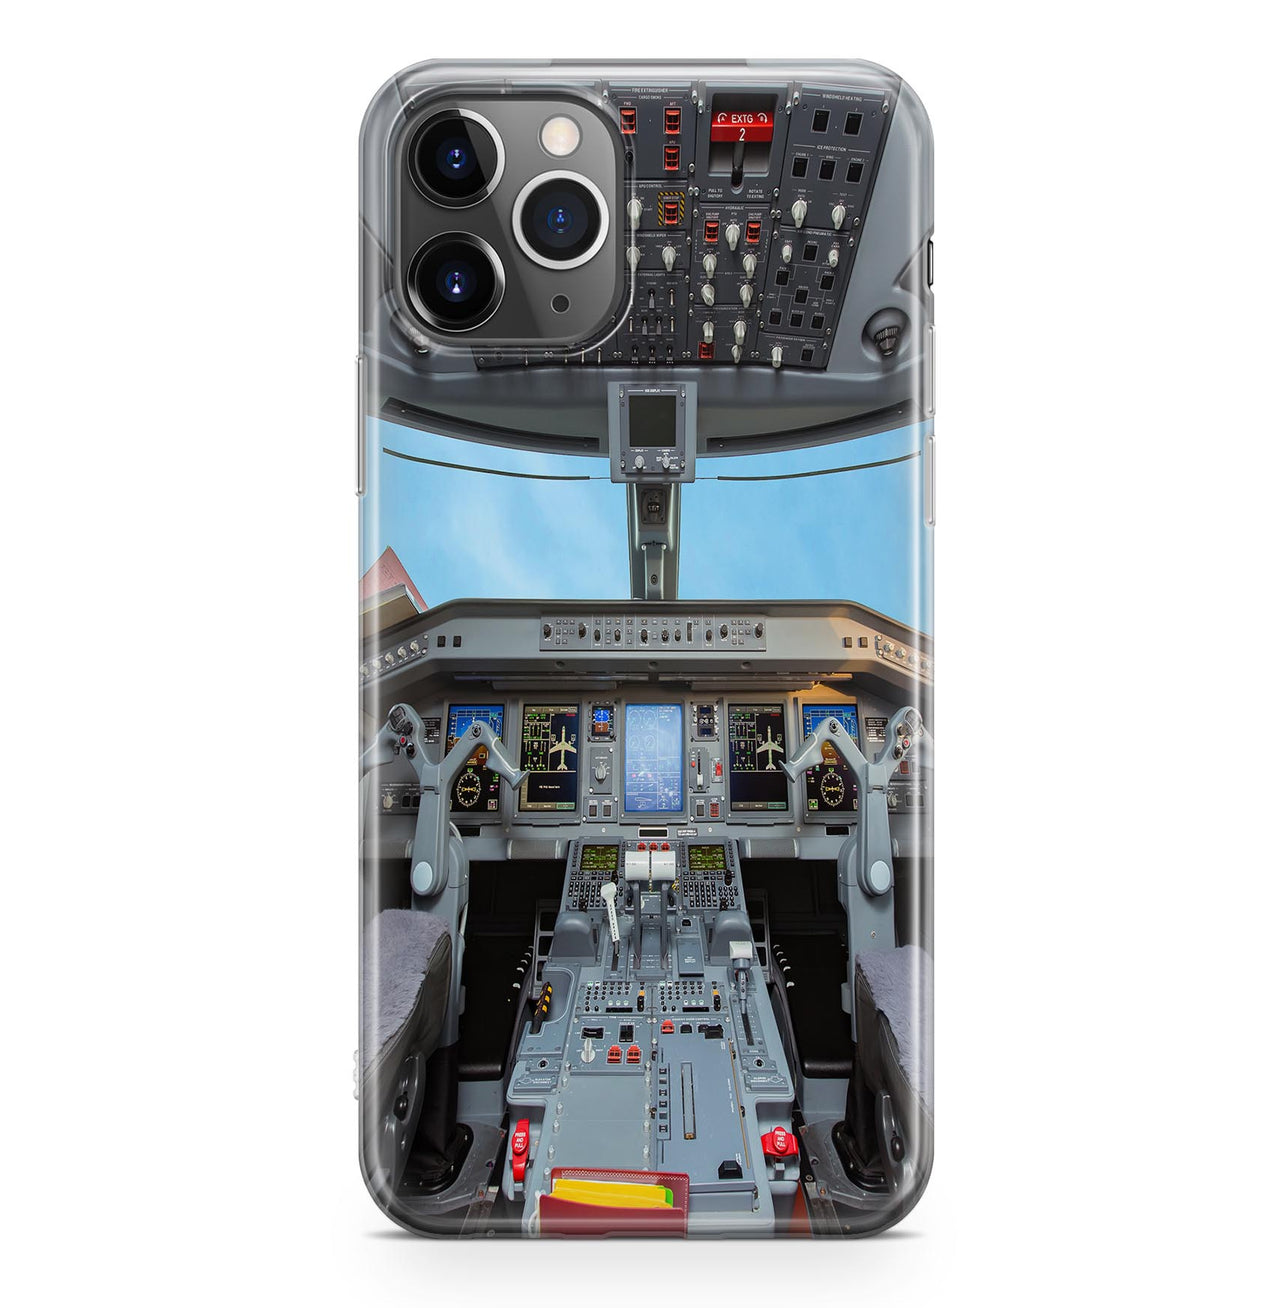 Embraer E190 Cockpit Printed iPhone Cases